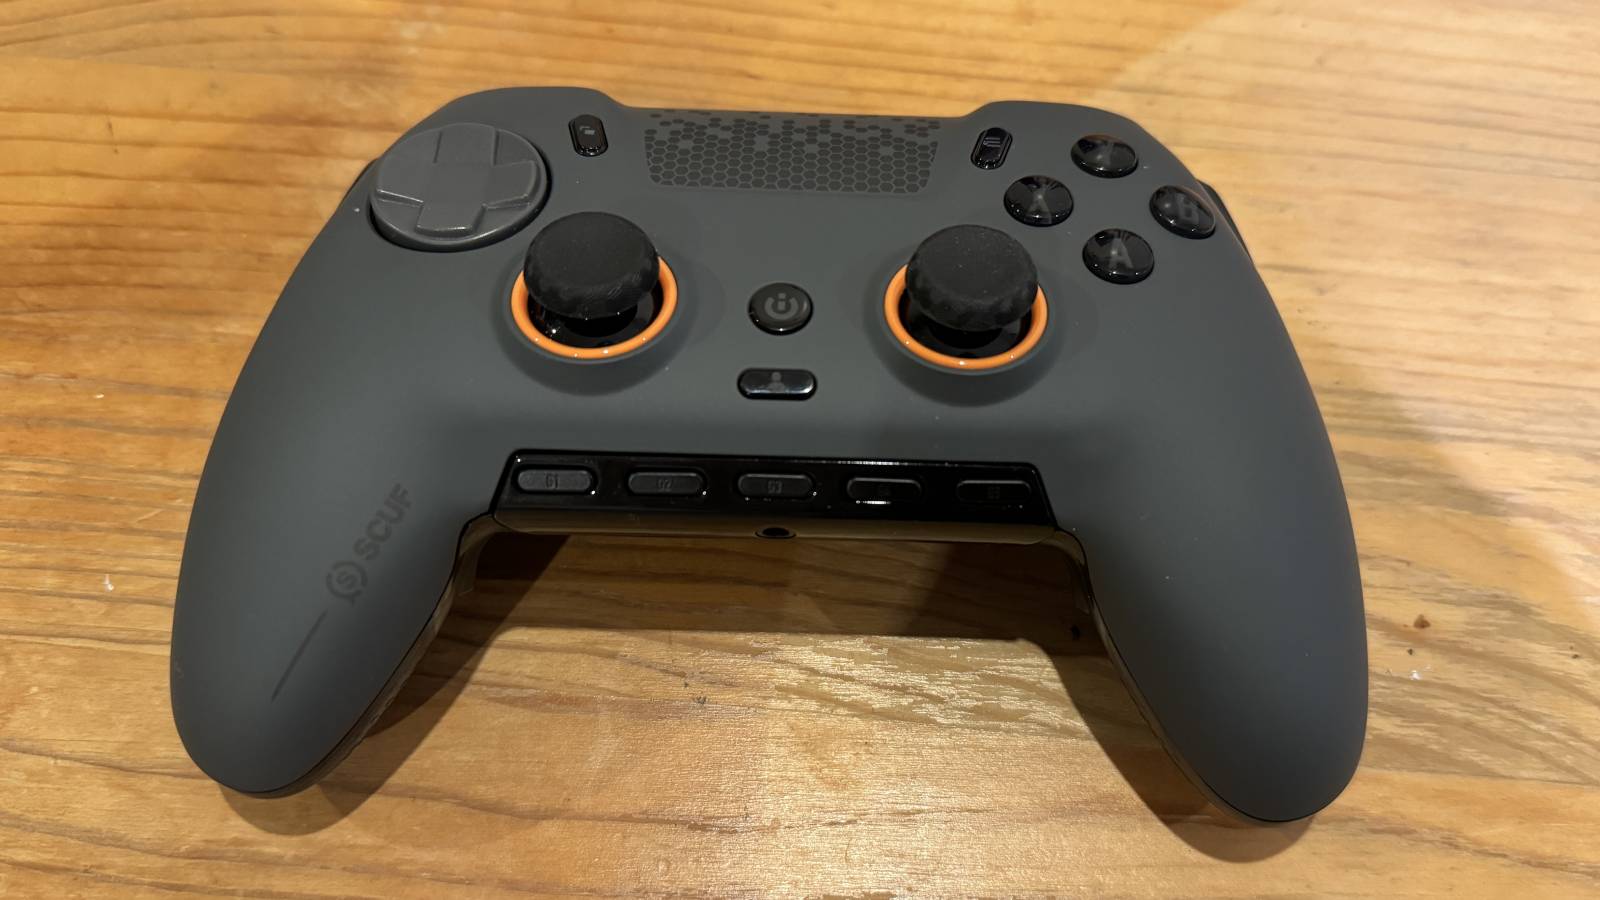 Scuf Envision Pro review: A truly next-generation PC controller 